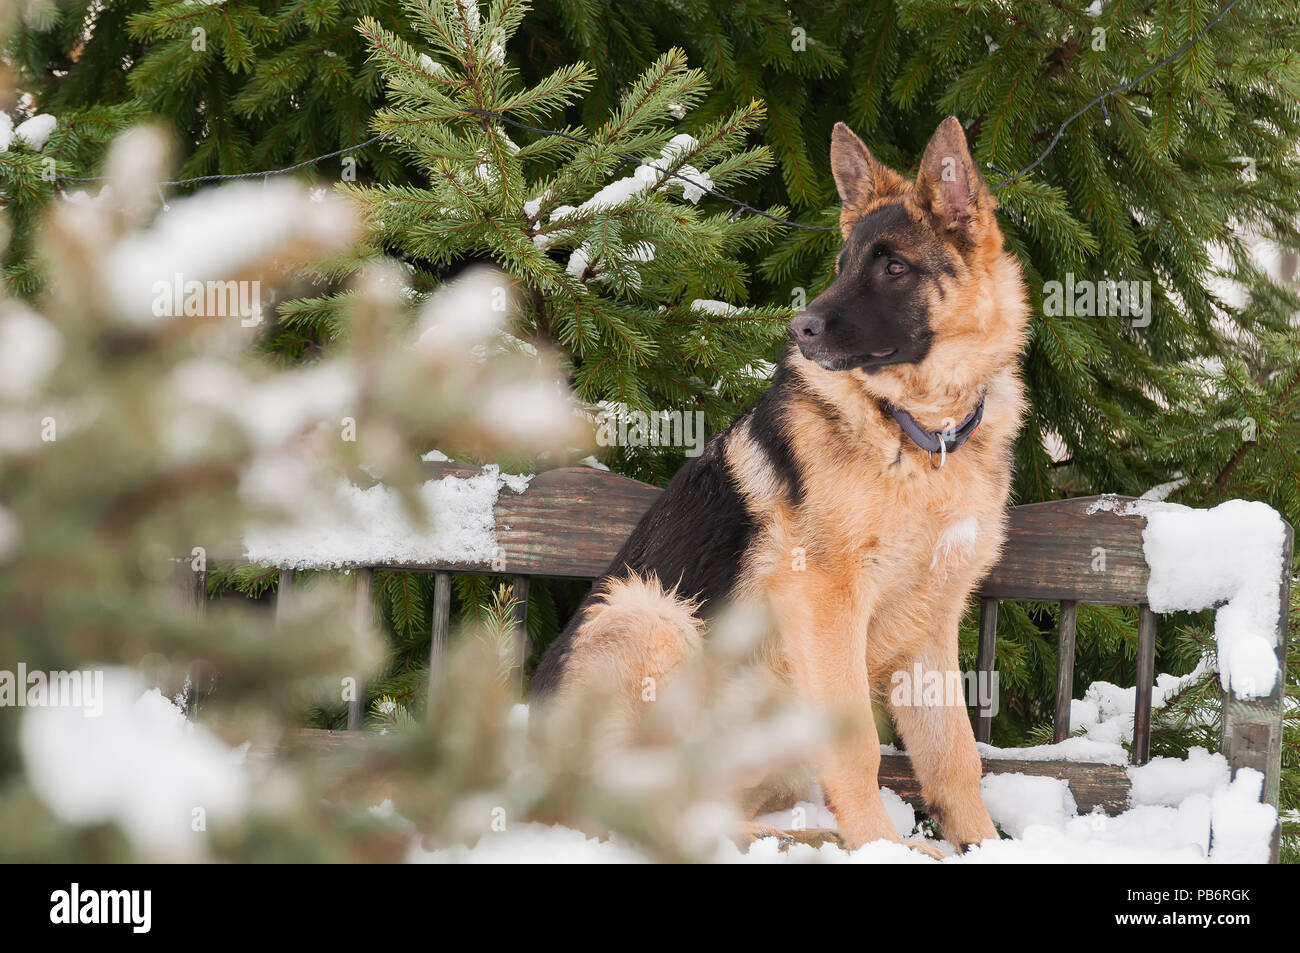 A beautiful playful german shepherd puppy dog sitting on a wooden bench at winter. Stock Photo